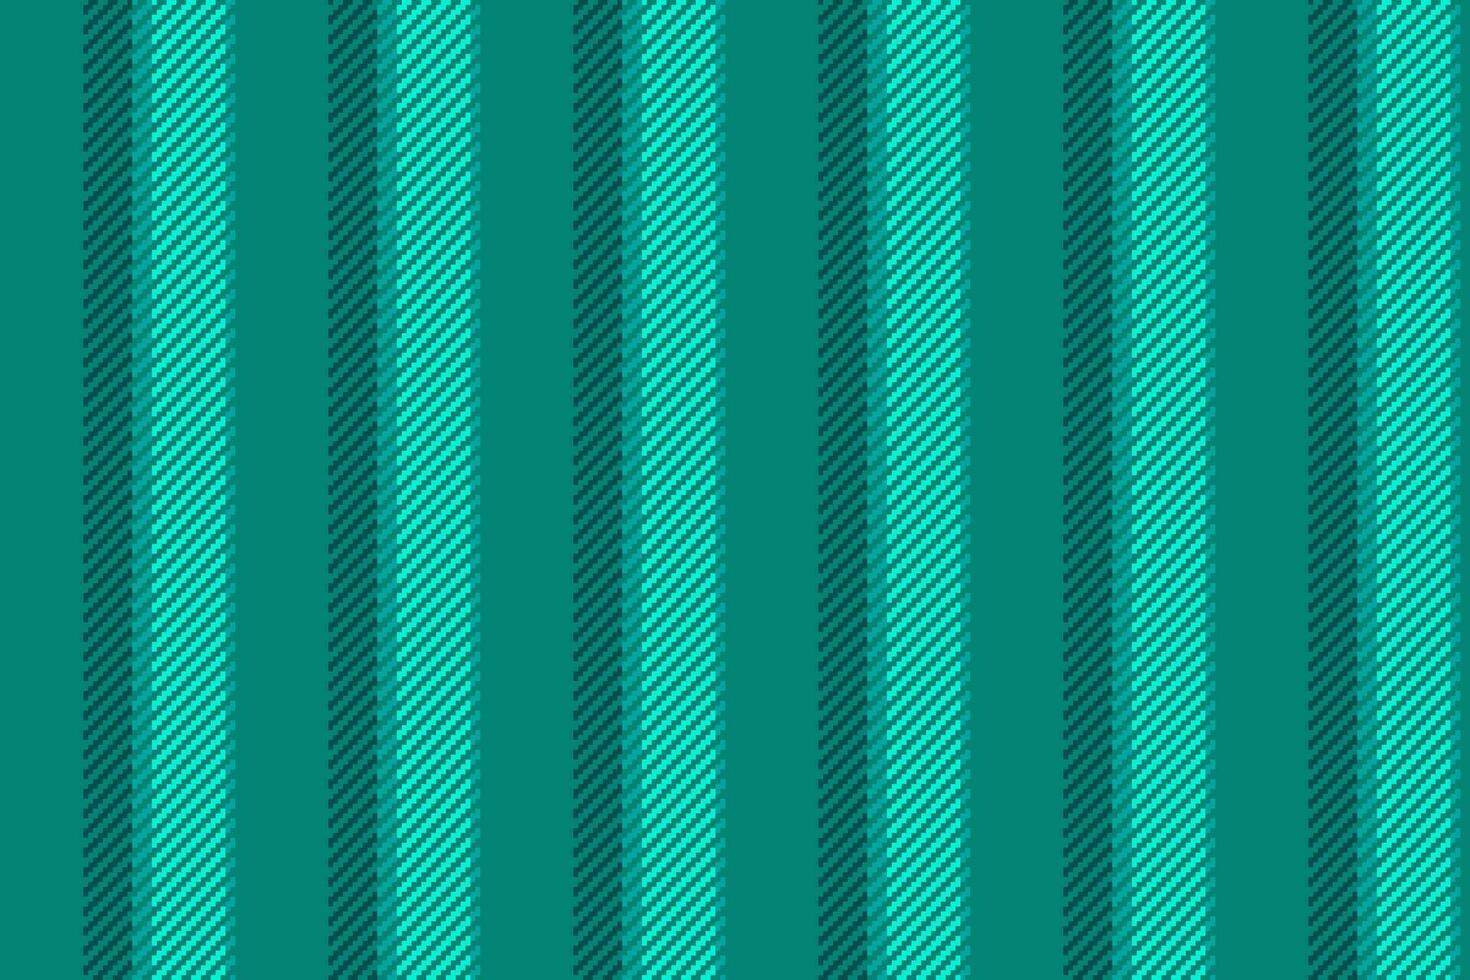 Texture seamless lines of vector vertical pattern with a textile stripe fabric background.